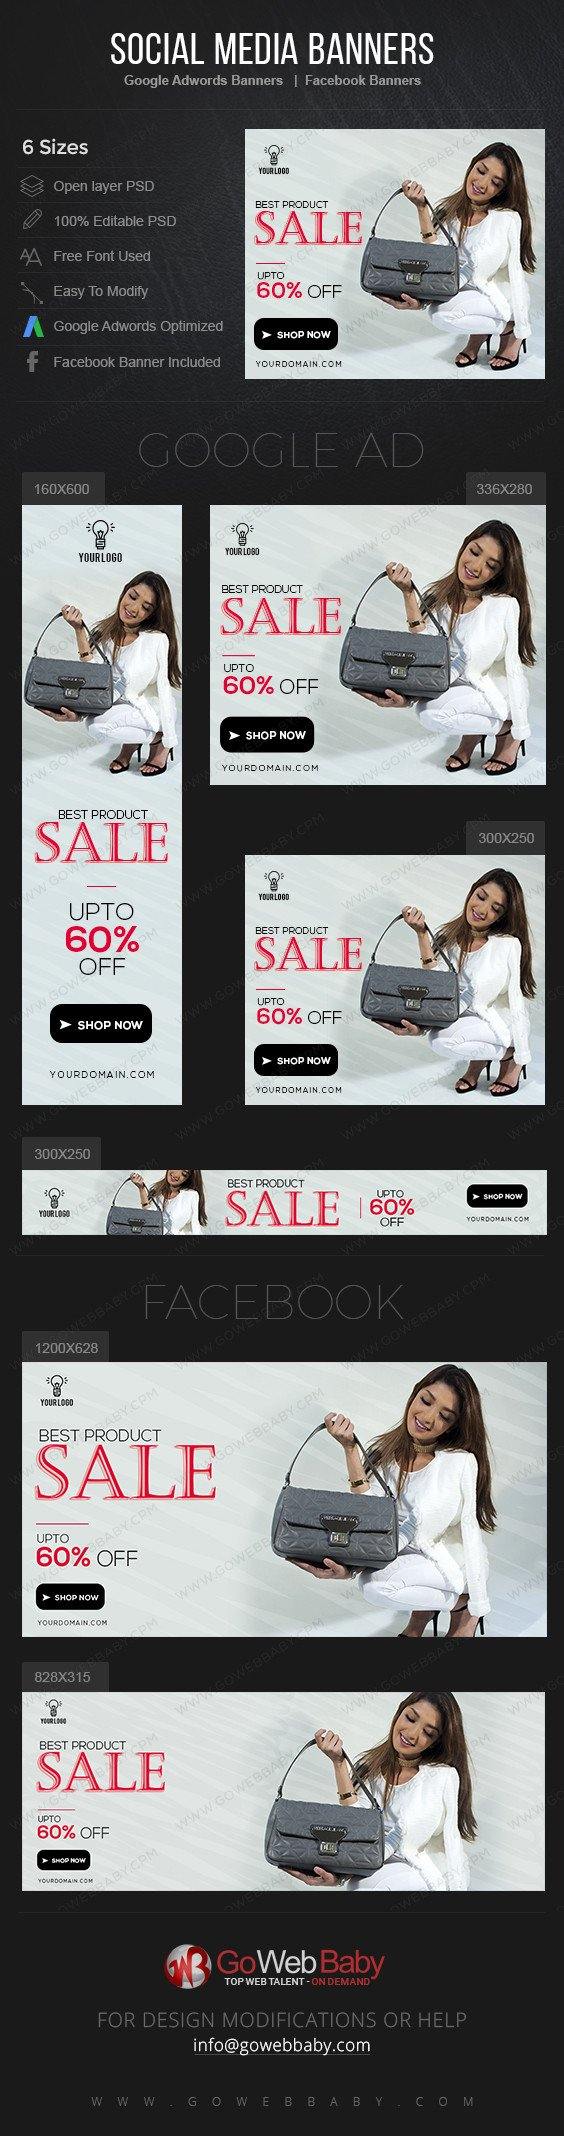 Google Adwords Display Banner With Facebook Banners - Elegant Bags For Website Marketing - GoWebBaby.Com